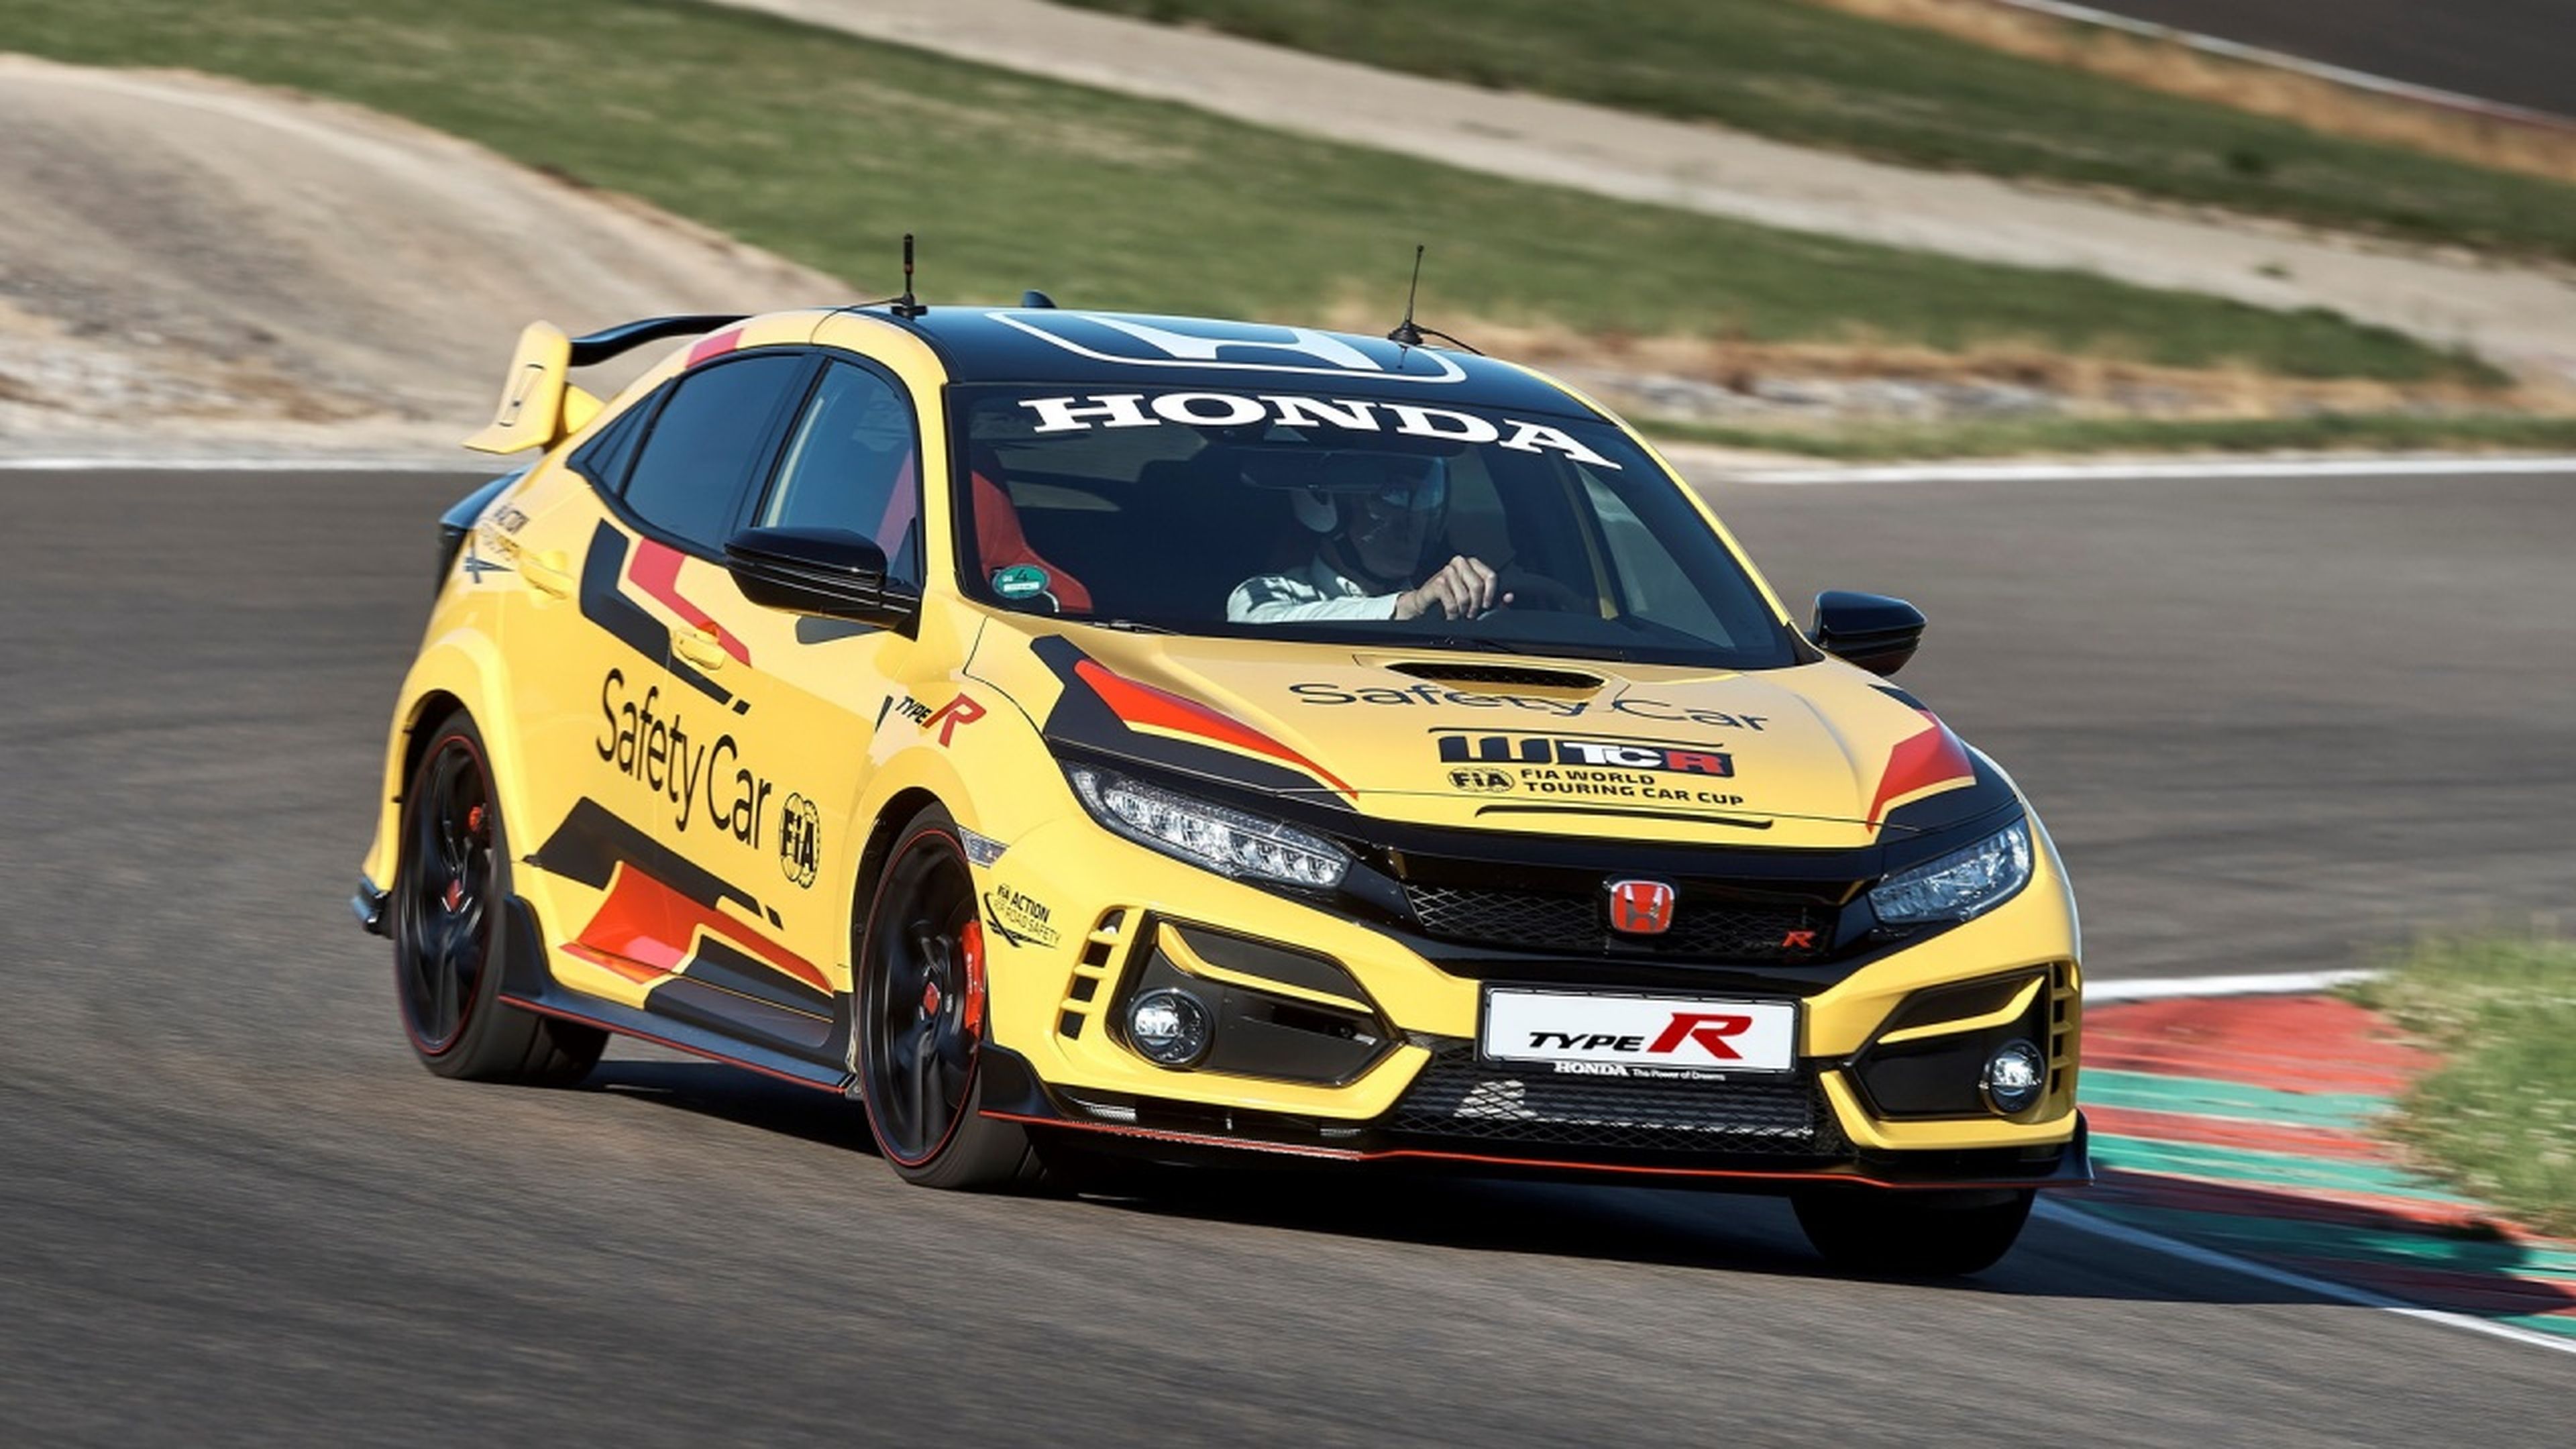 Honda Civic Type R Limited Edition WTCR Safety Car